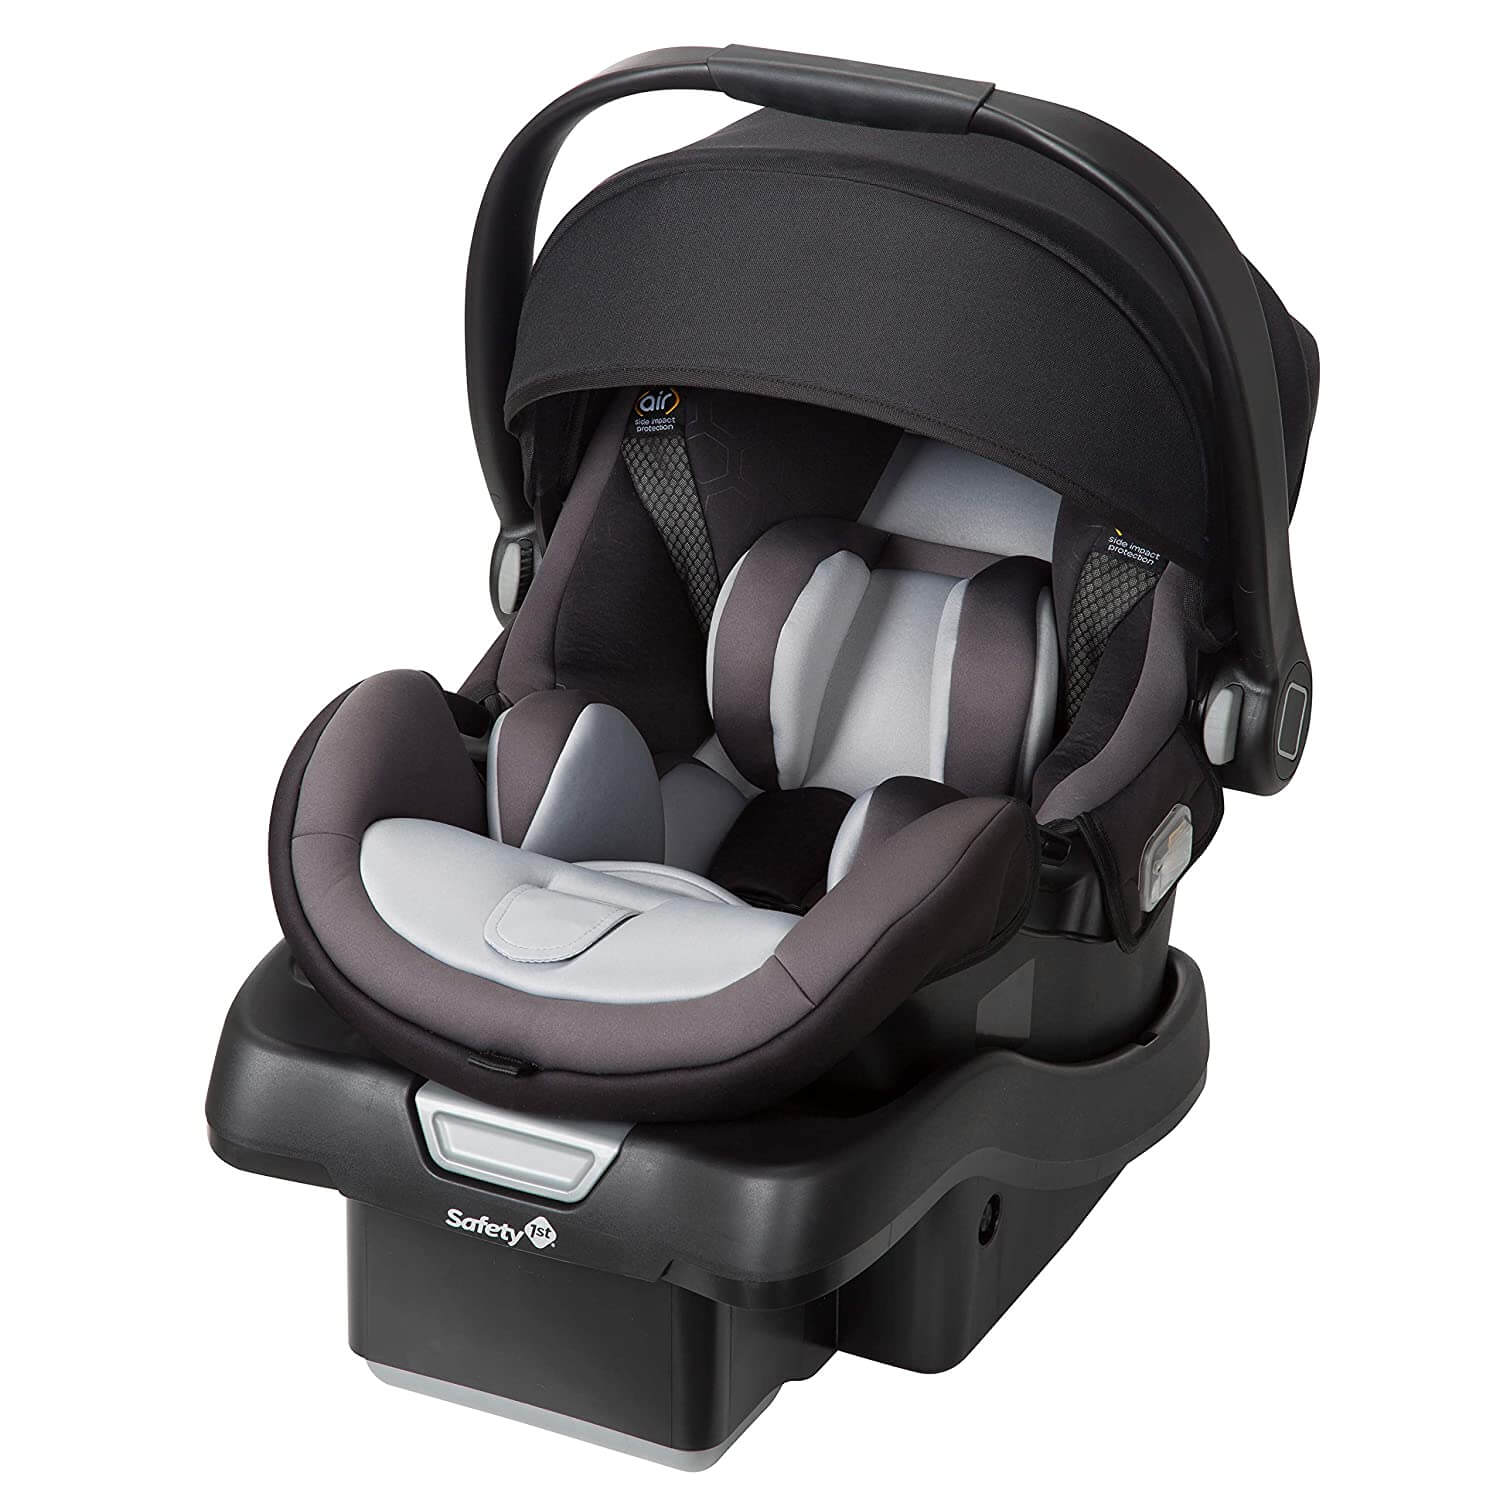 Best Infant Car Seat for Easy Install - Safety 1st onBoard 35 Air 360 Infant Car Seat 